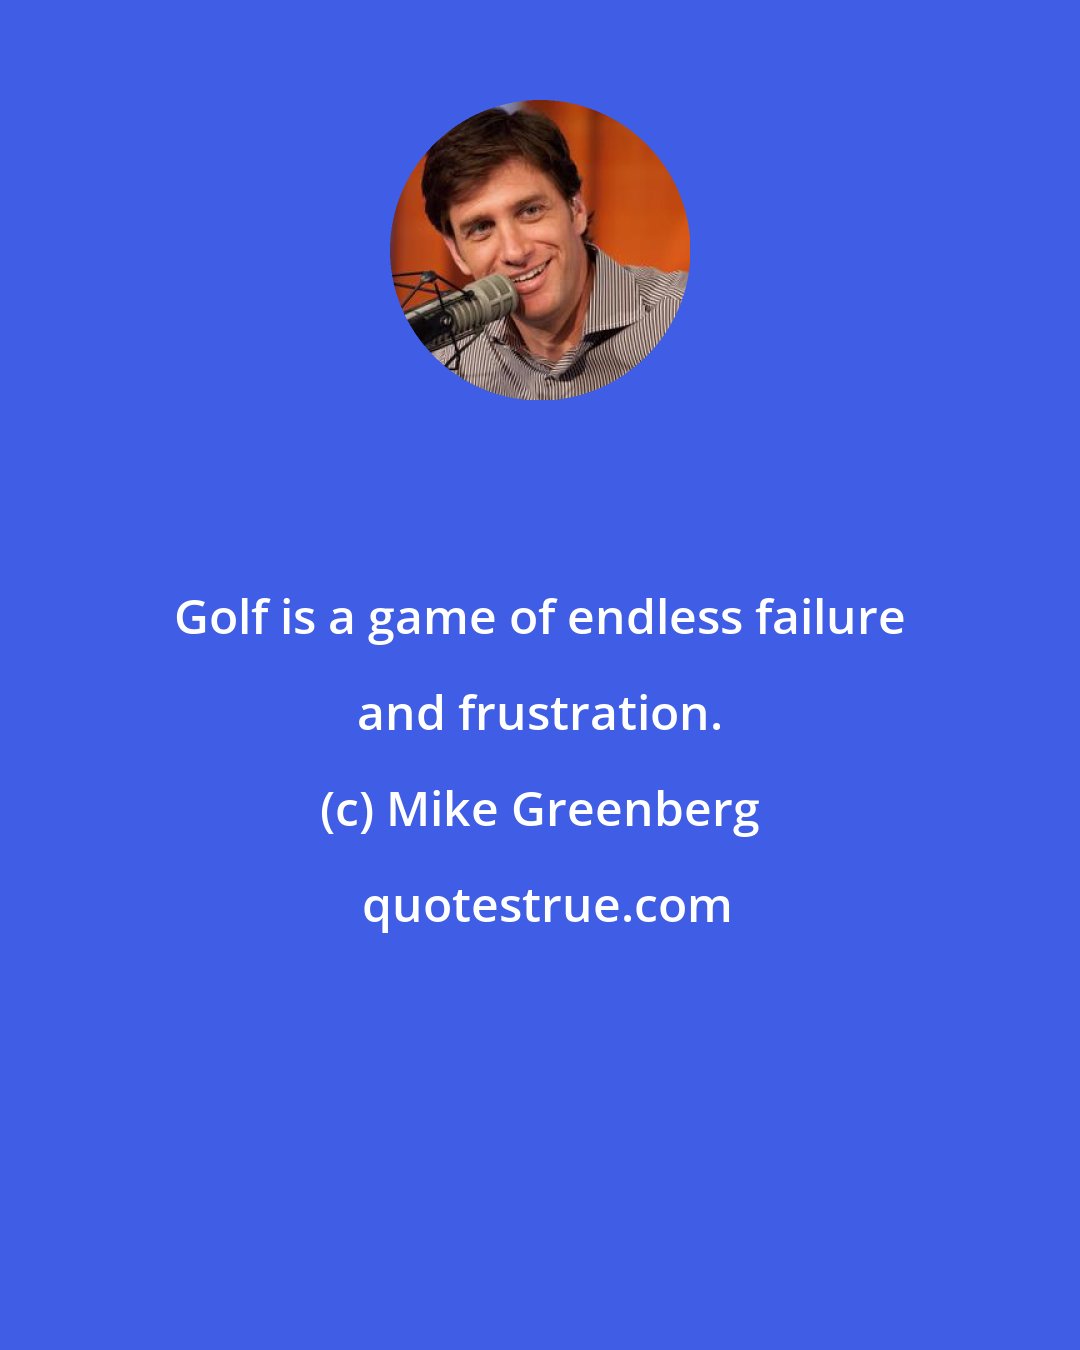 Mike Greenberg: Golf is a game of endless failure and frustration.